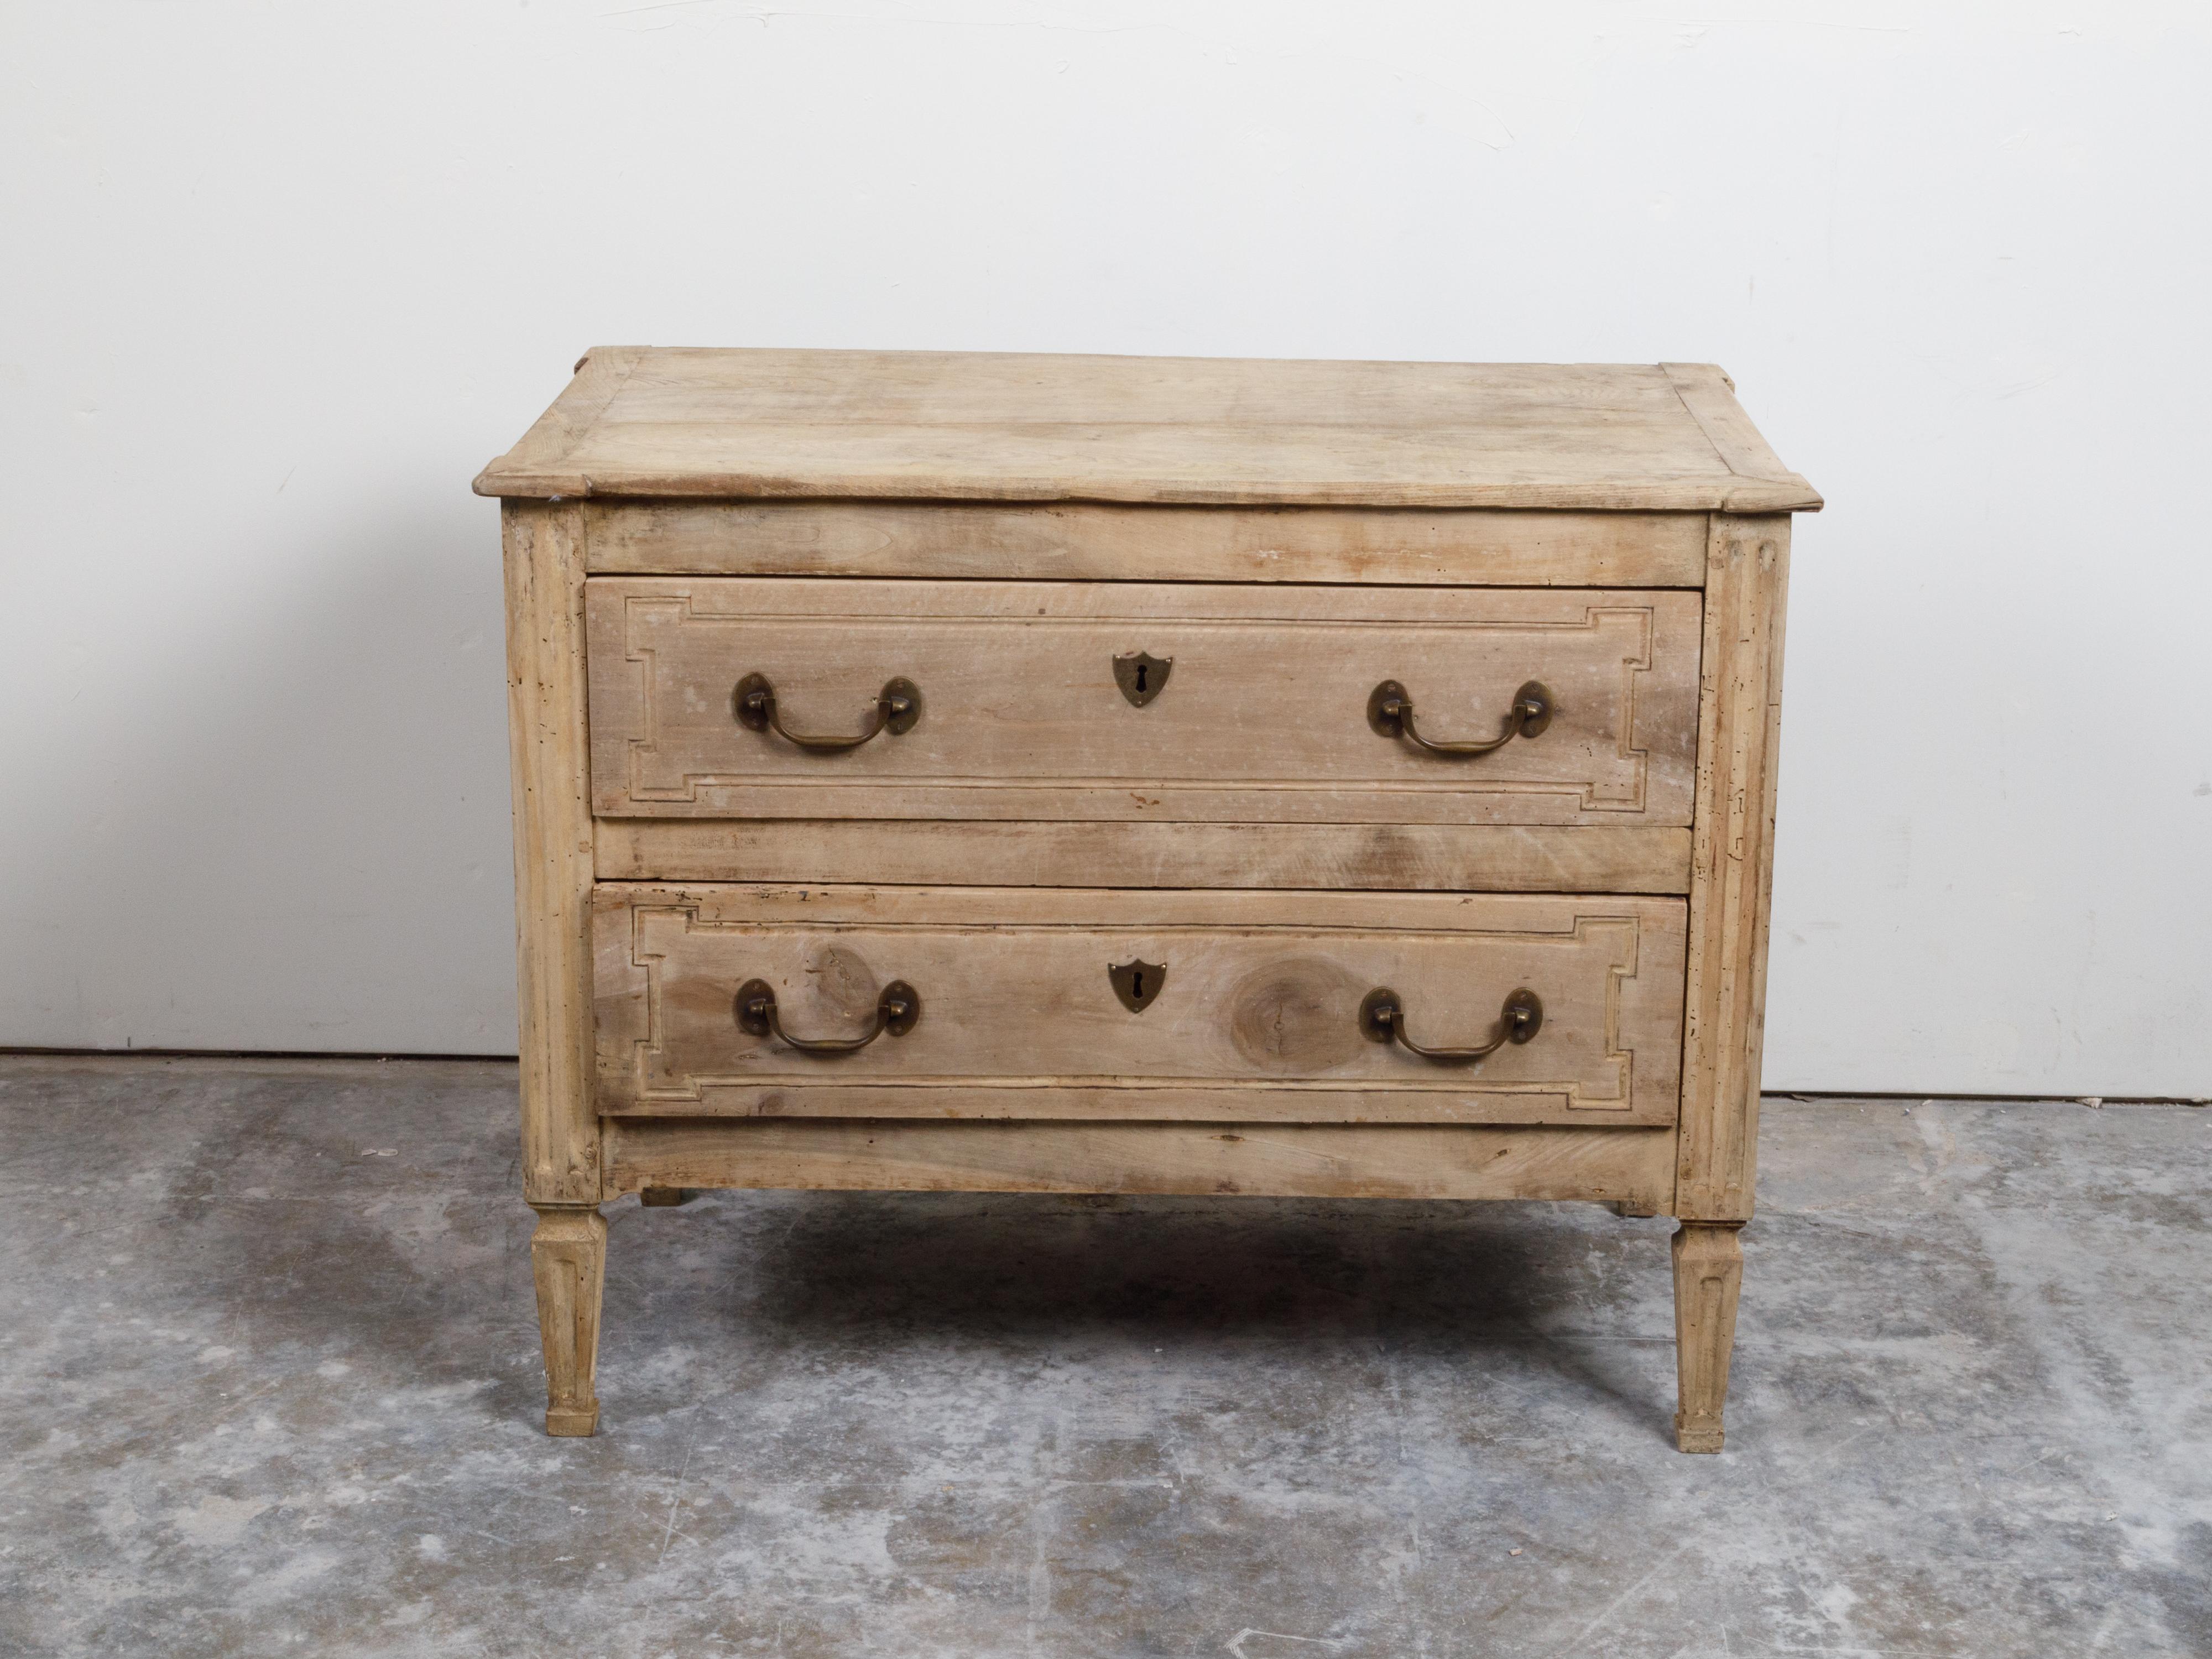 An Italian neoclassical period bleached walnut commode from the 18th century, with two drawers, fluted side posts and tapered legs. Created in Italy during the 18th century, this Neoclassical bleached walnut commode features a rectangular top